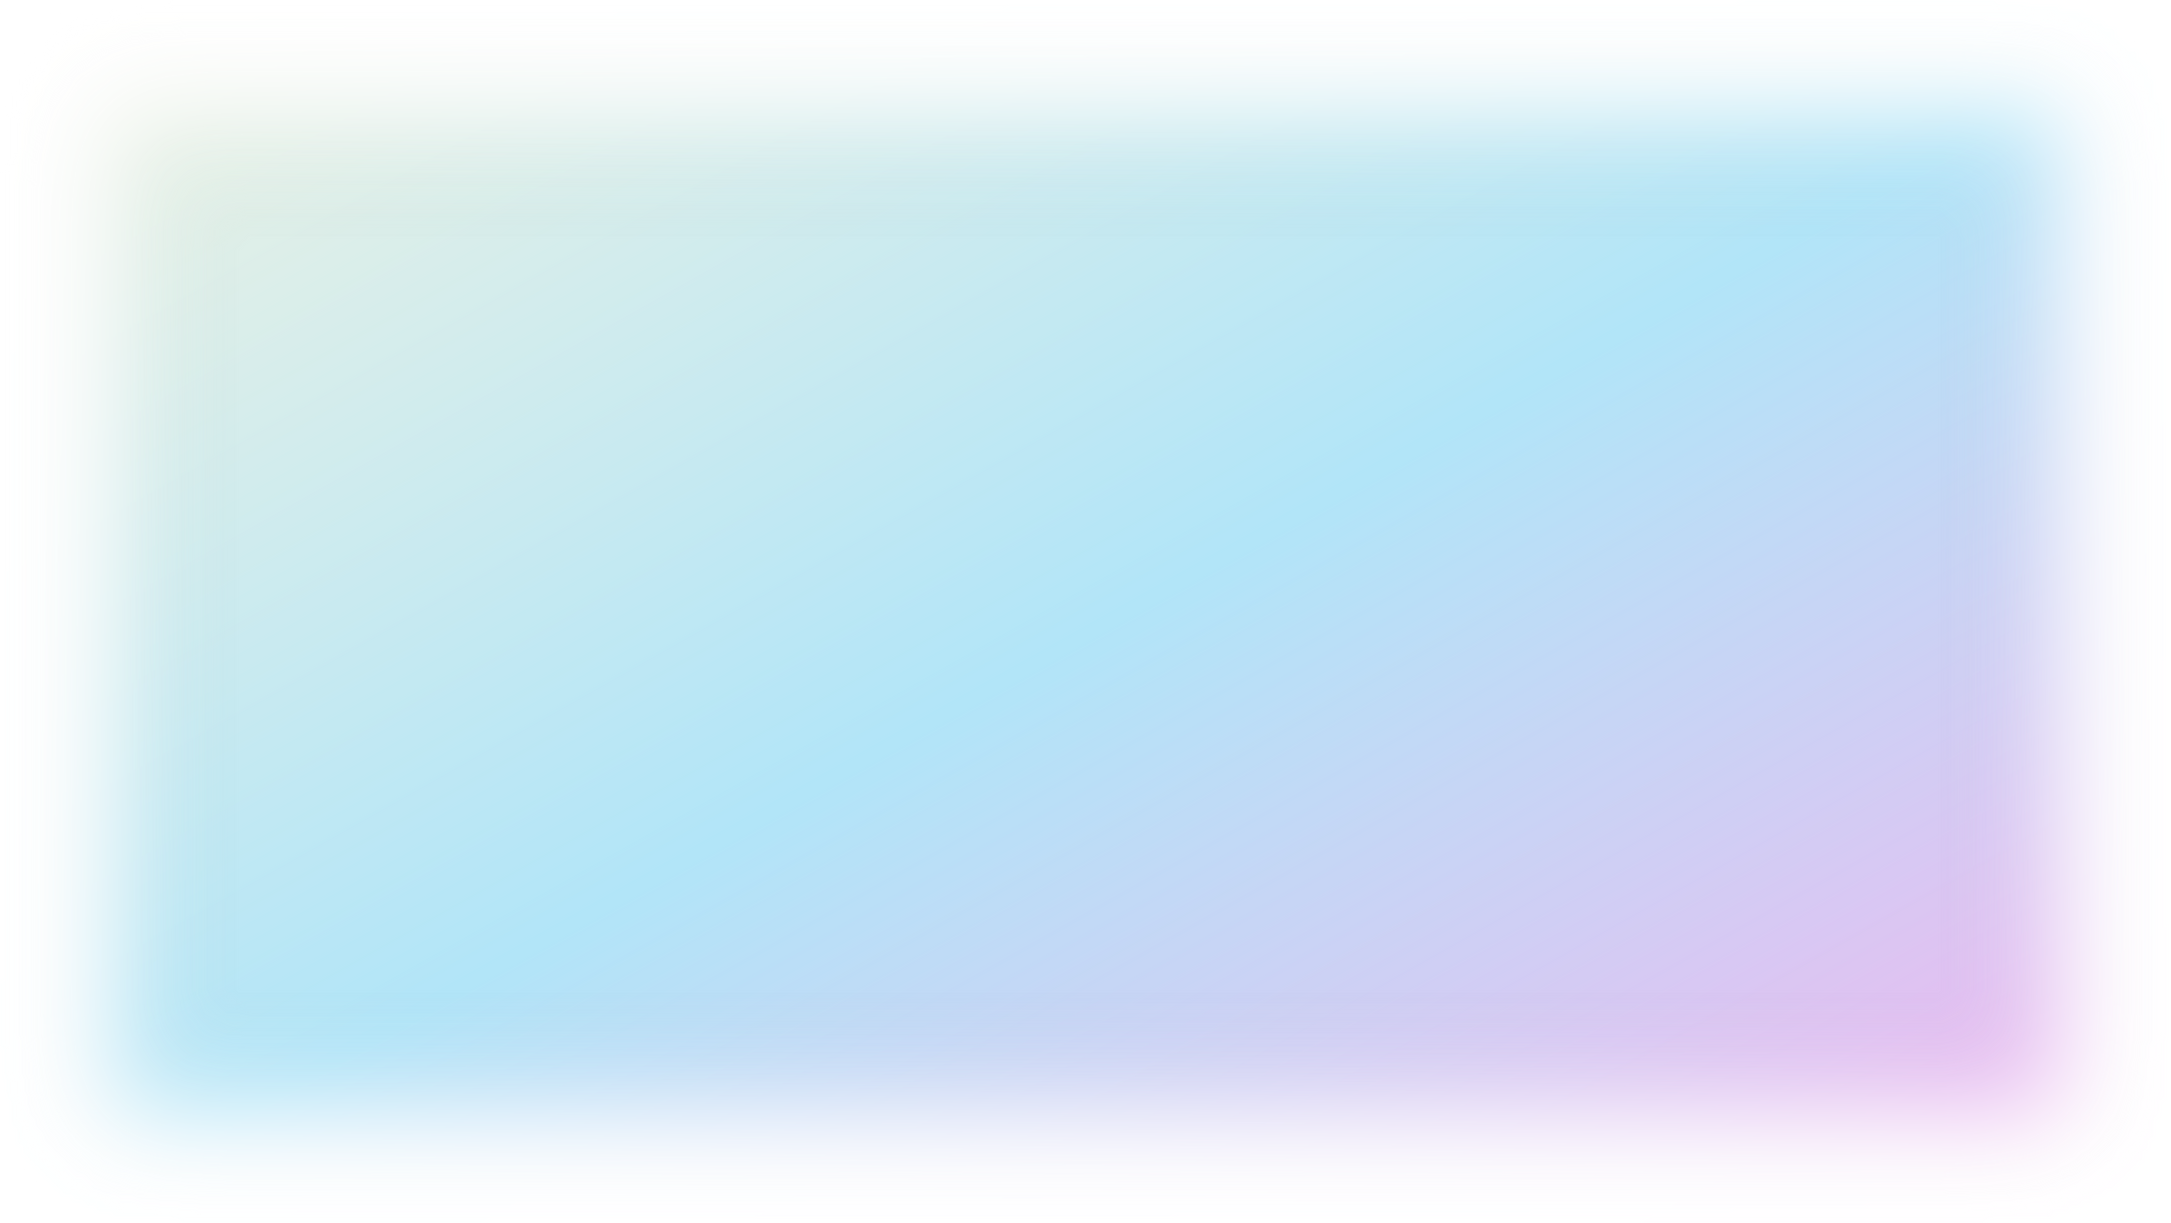 Gradient Blurred Rectangle